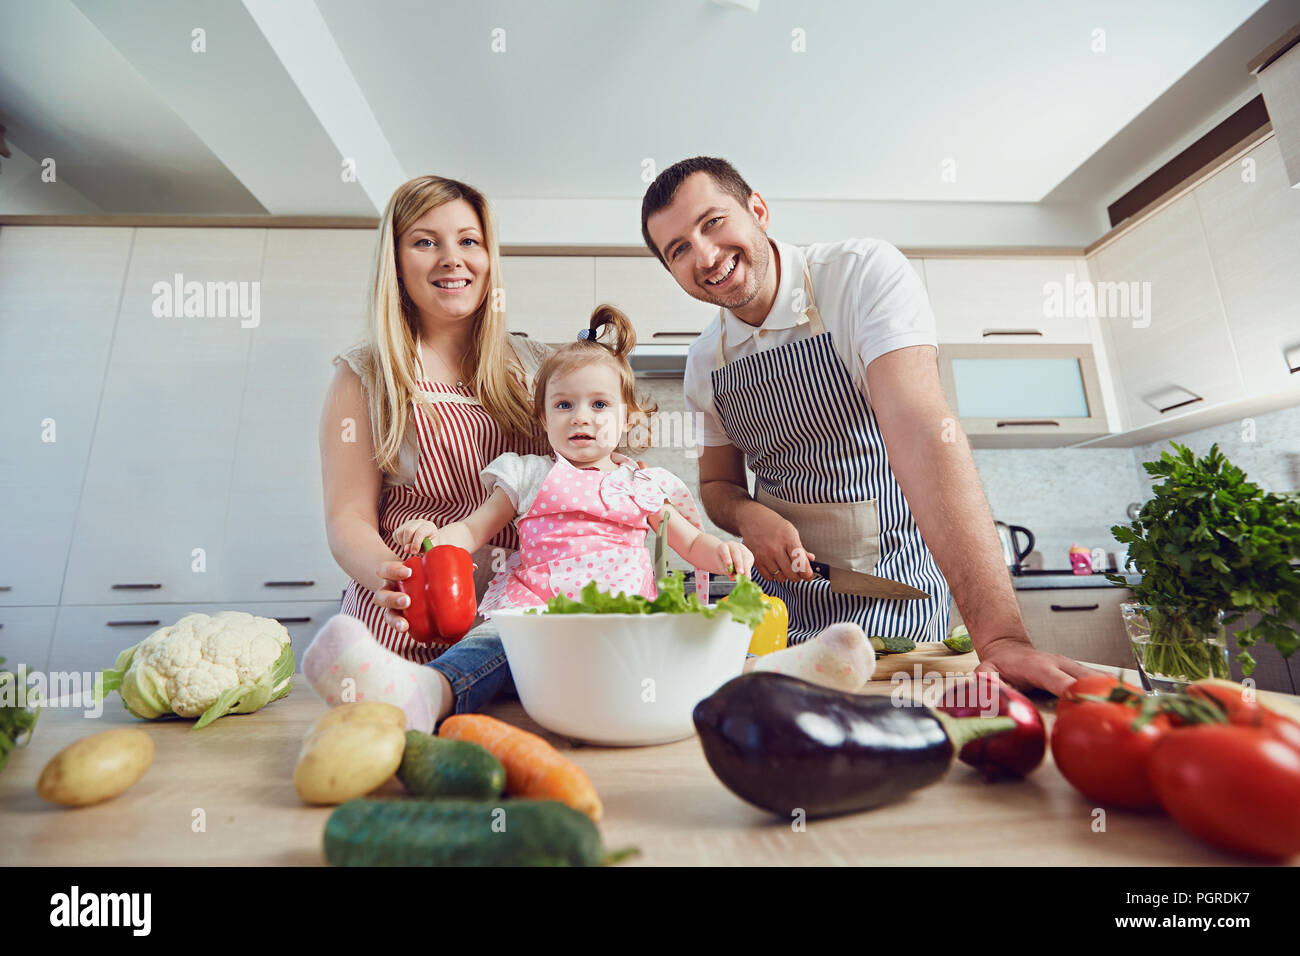 A happy family prepares food  in the kitchen. Stock Photo